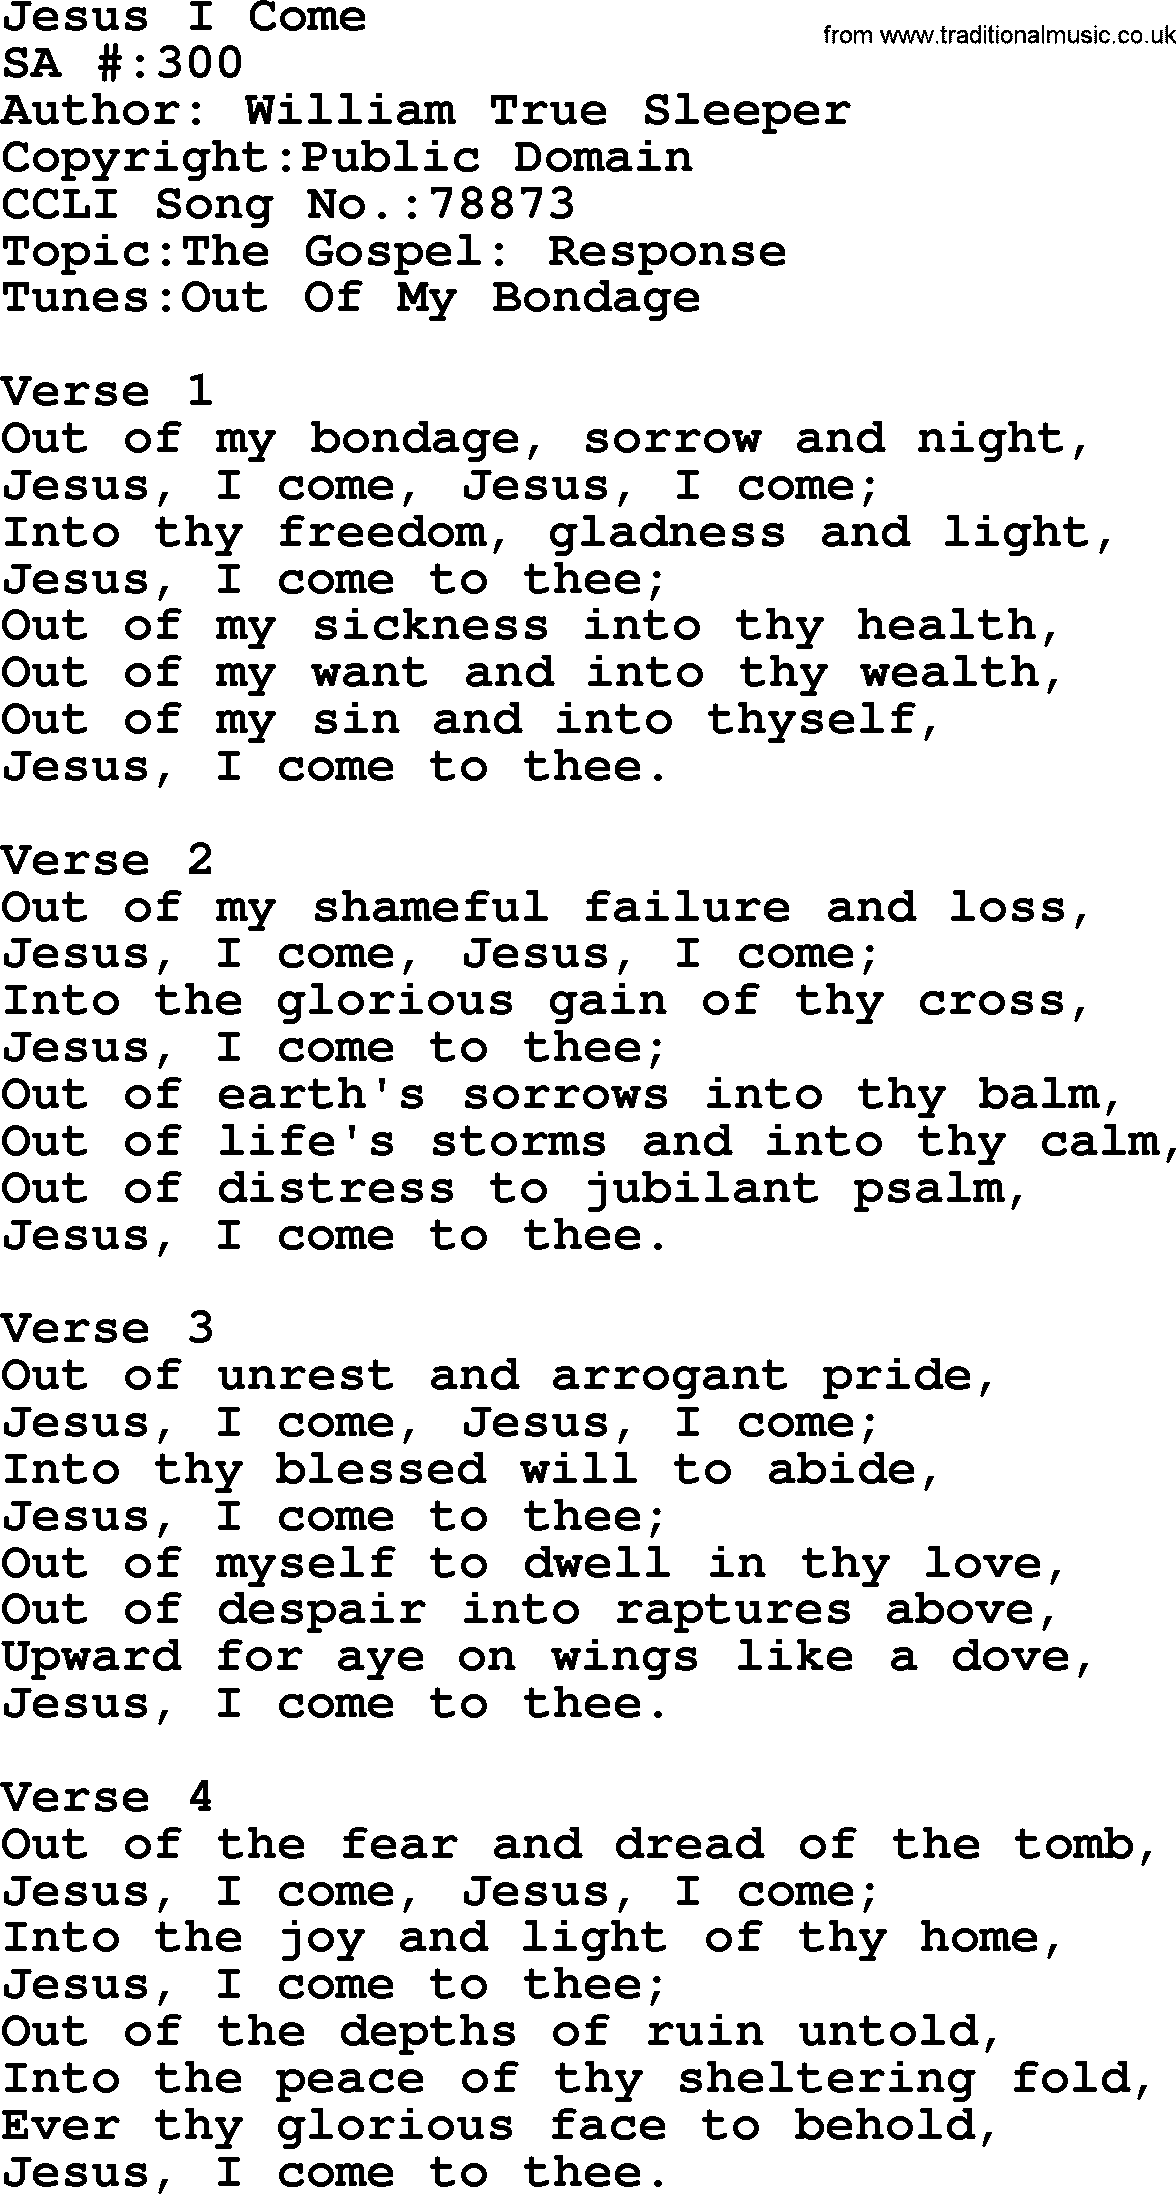 Salvation Army Hymnal, title: Jesus I Come, with lyrics and PDF,